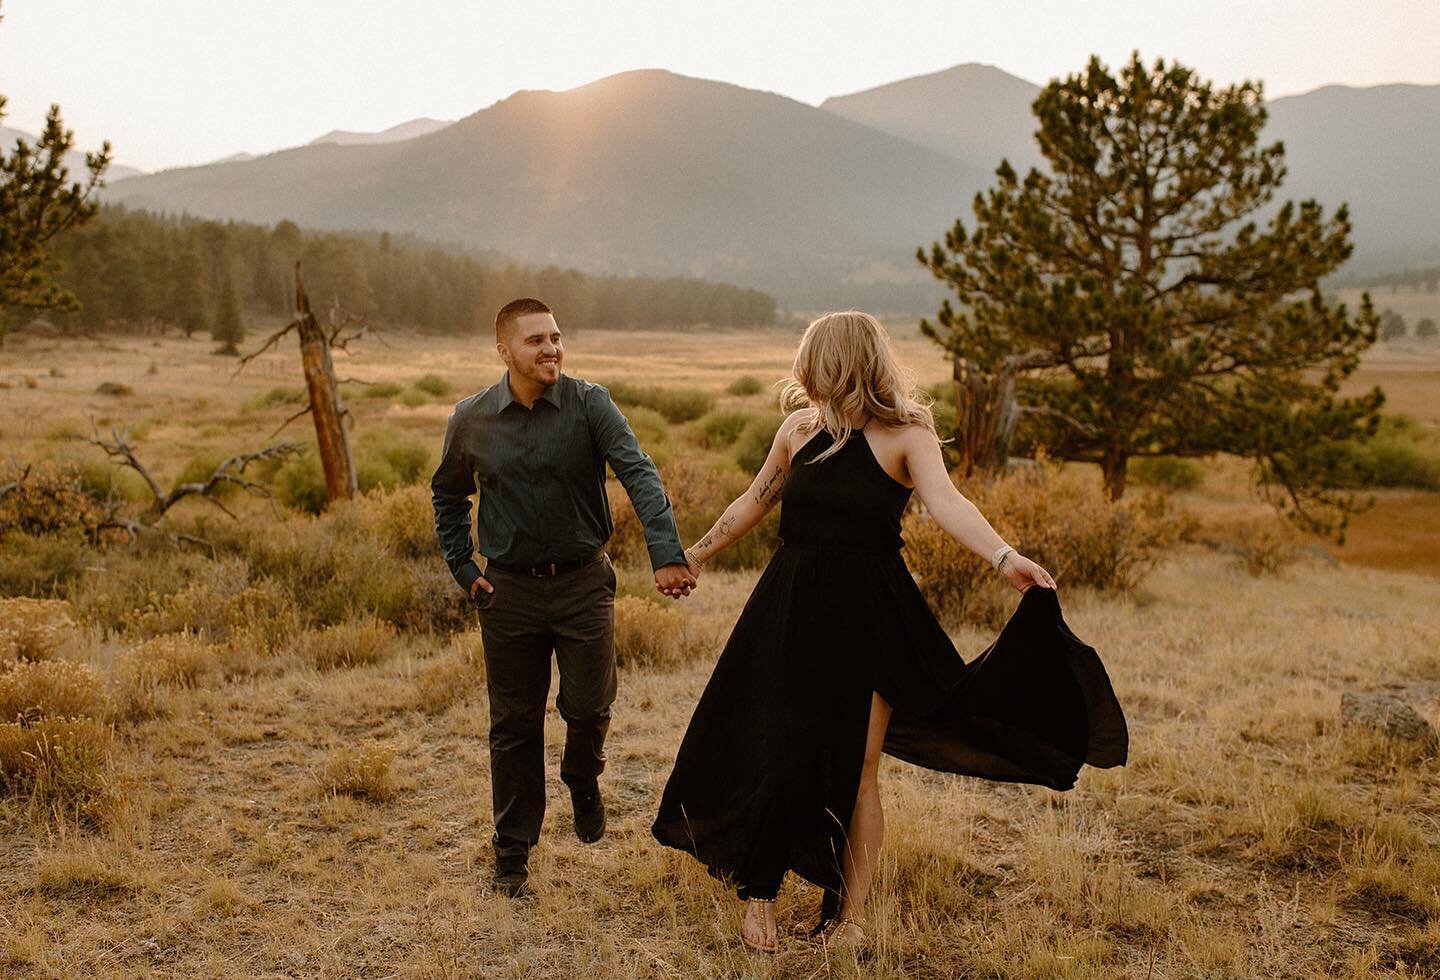 Missing summer sunsets in RMNP right about now ❤️✨
&bull;
&bull;
&bull;
&bull;
&bull;
&bull;
&bull;
&bull;
&bull;
&bull;
&bull;
#coloradoelopementphotographer #coloradoelopement #denverweddingphotographer #denverwedding #coloradoweddingvenue #colorad